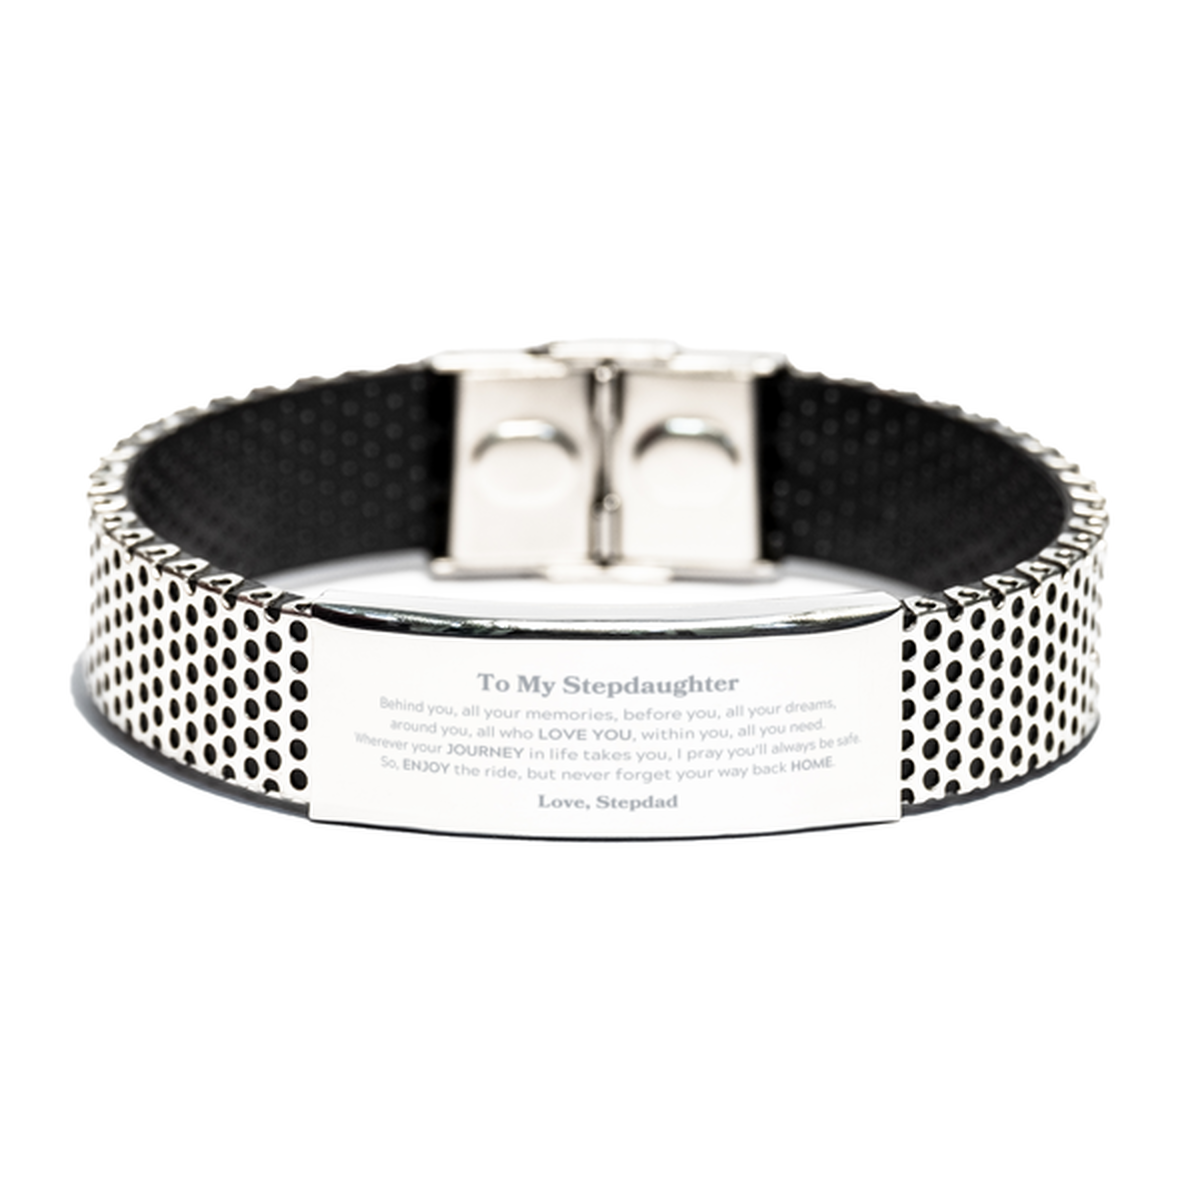 To My Stepdaughter Graduation Gifts from Stepdad, Stepdaughter Stainless Steel Bracelet Christmas Birthday Gifts for Stepdaughter Behind you, all your memories, before you, all your dreams. Love, Stepdad